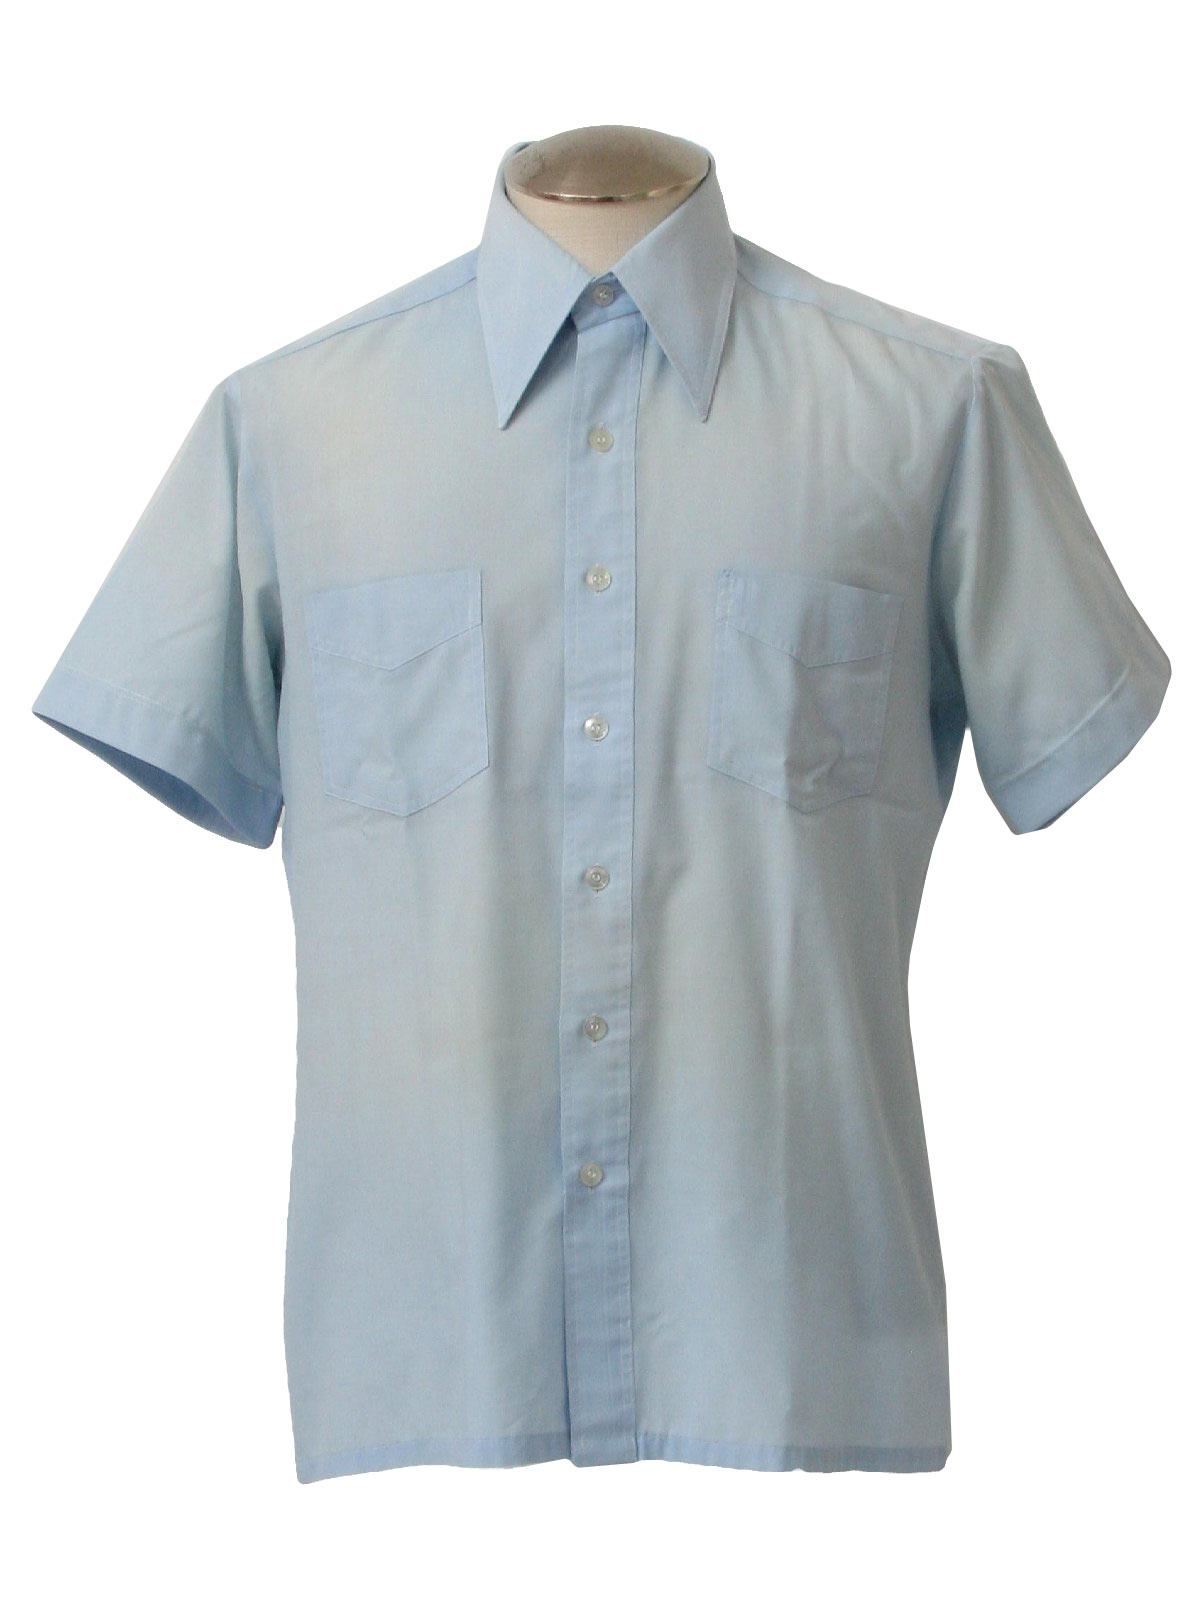 Seventies JCPenney Shirt: 70s -JCPenney- Mens baby blue, blended ...